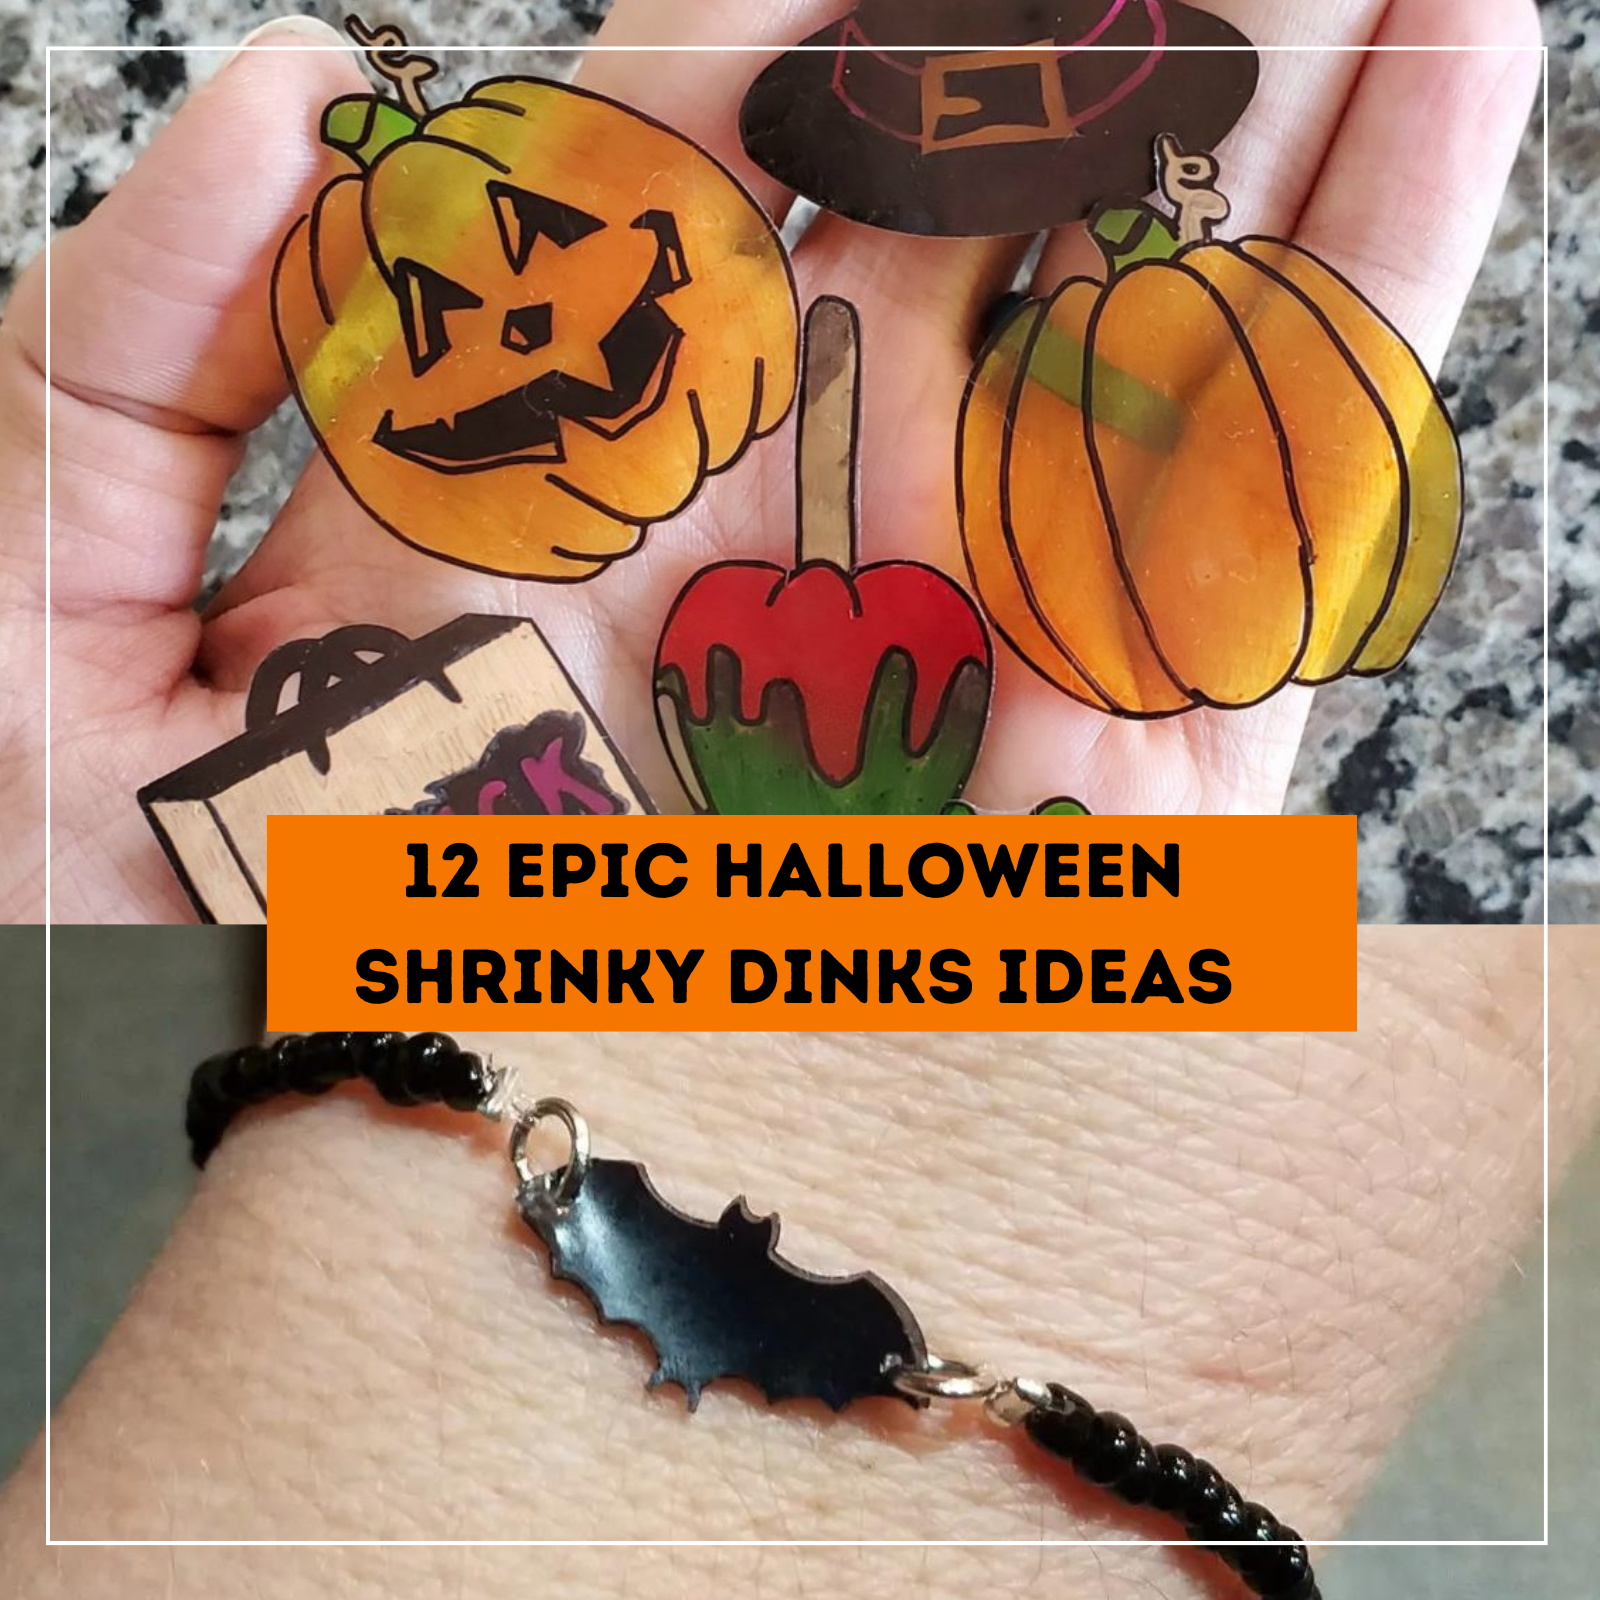 2 photos, one of a hand holding several Halloween shrinky dinks, the other of a wrist wearing a black bat bracelet. text reads 12 epic halloween shrinky dinks ideas